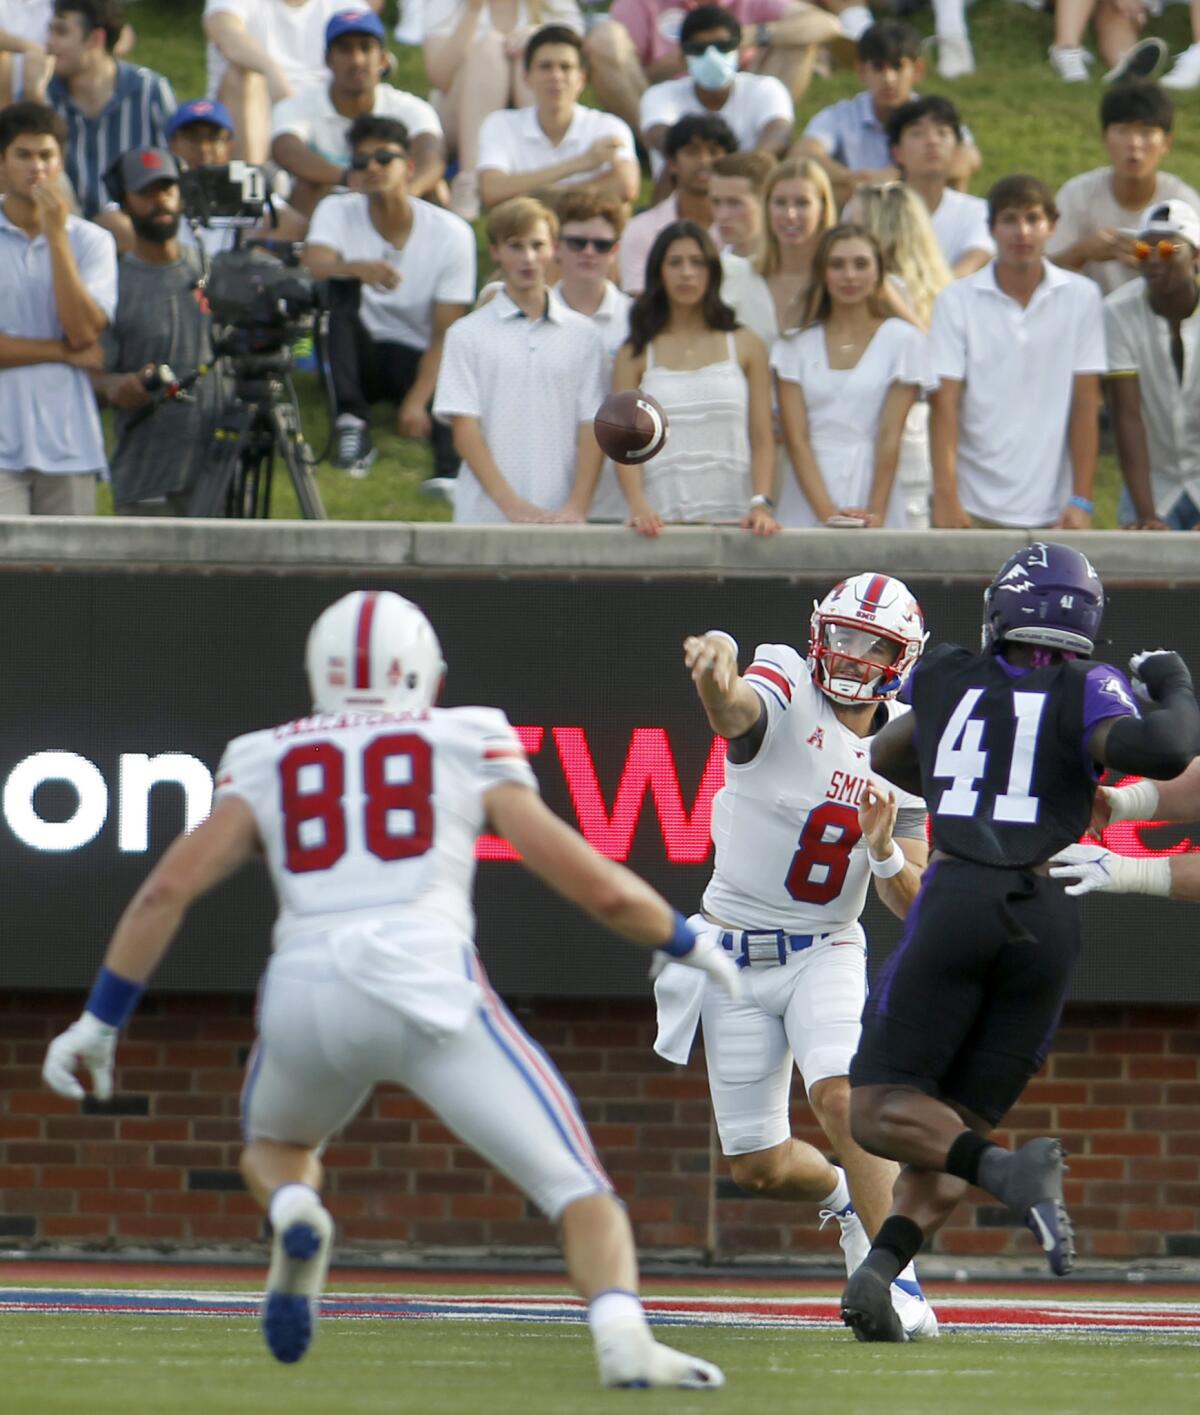 SMU quarterback Tanner Mordecai (8) throws a pass to tight end Grant Calcaterra (88) as Abilene Christian defensive lineman Tyrin Bradley (41) closes in during during the first quarter of an NCAA college football game Saturday, Sept. 4, 2021, in Dallas. (Steve Hamm/The Dallas Morning News via AP)